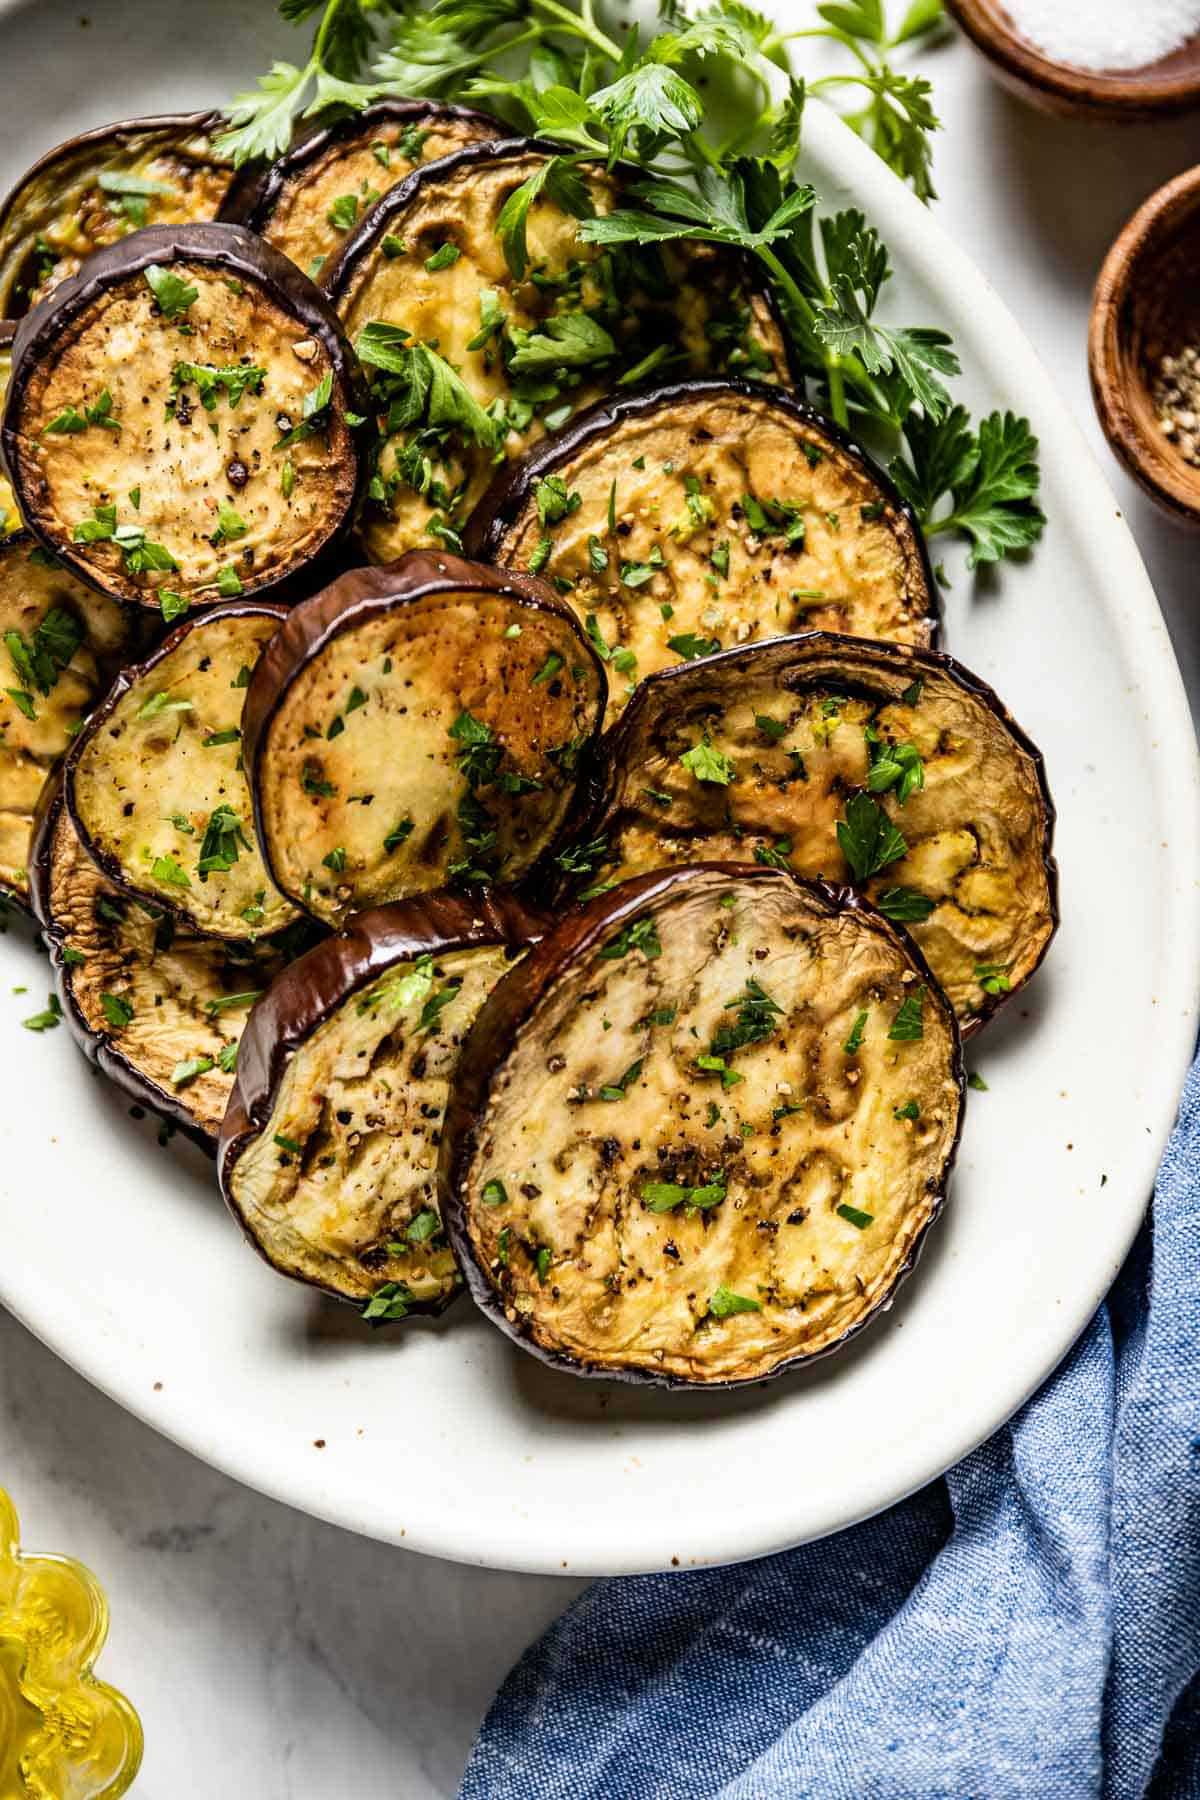 Baked Eggplant Slices garnished with fresh herbs on a plate